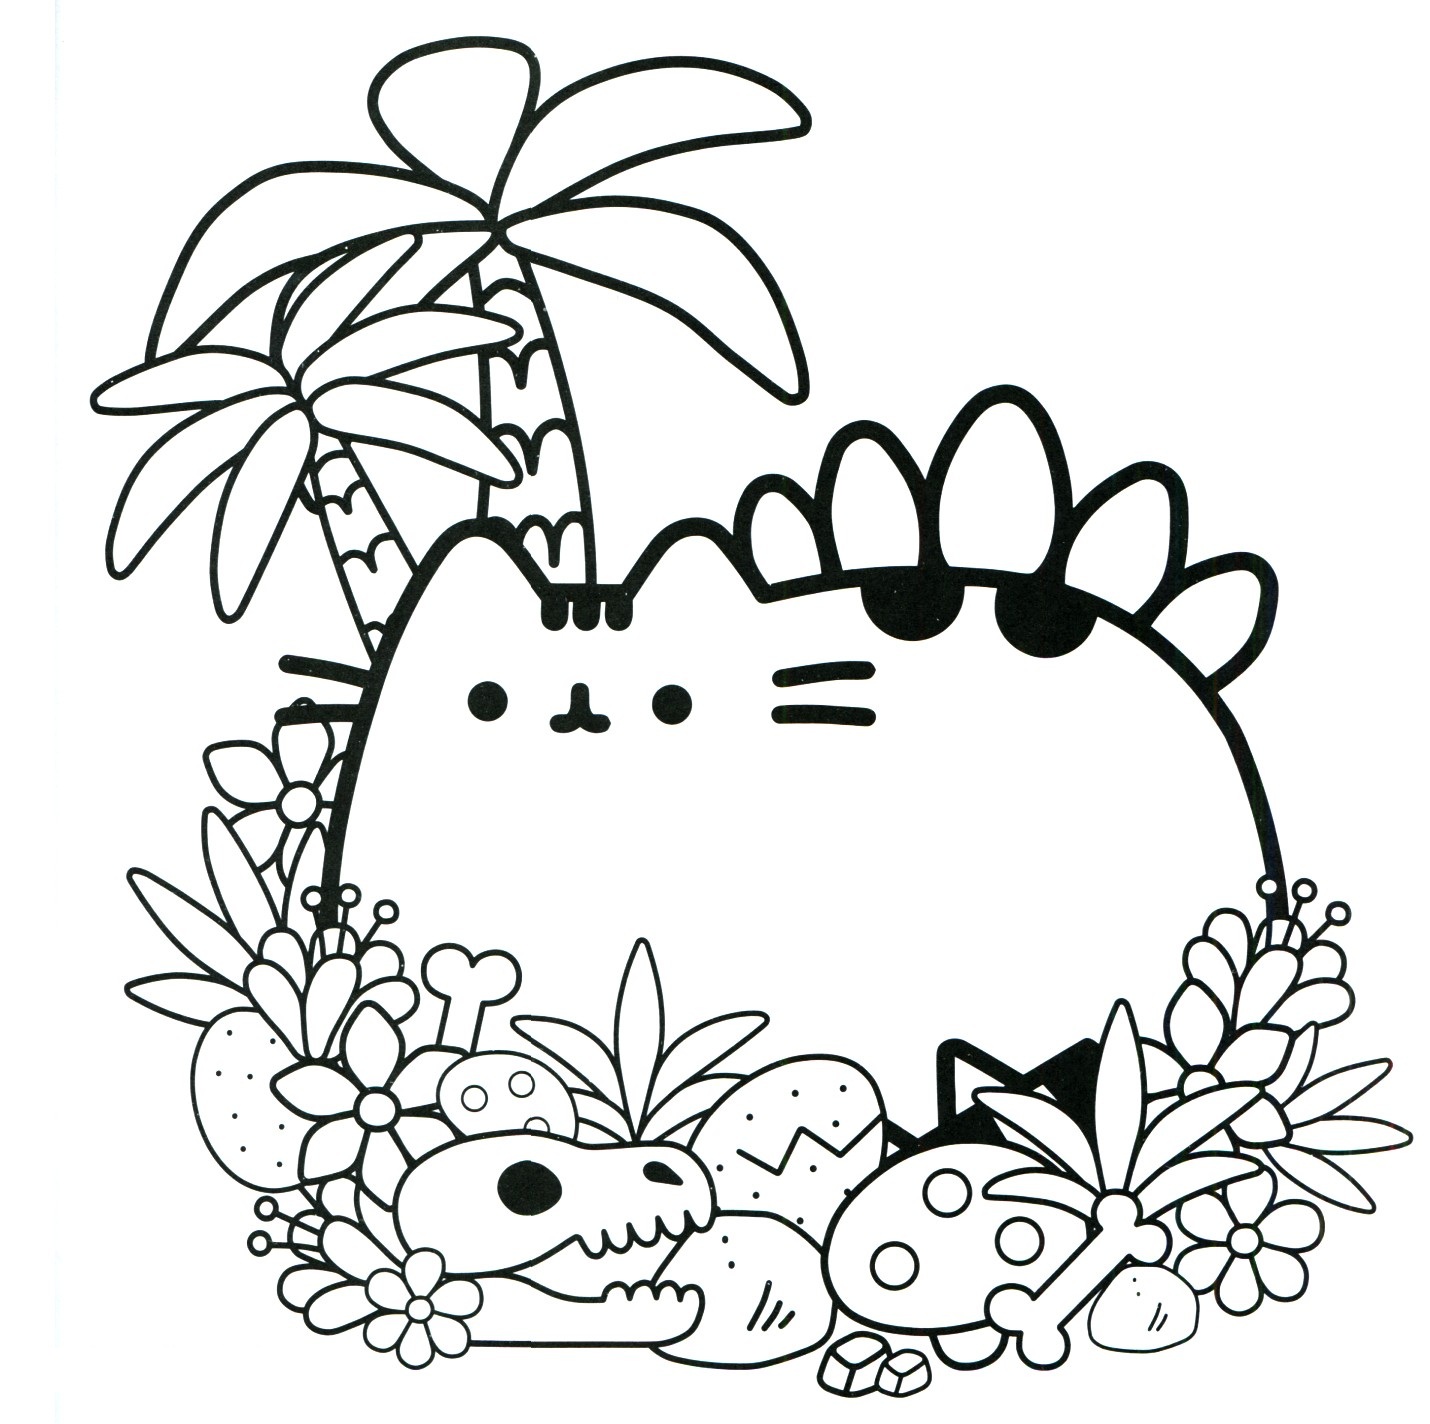 Cute Pusheen Coloring Page   Free Printable Coloring Pages ...